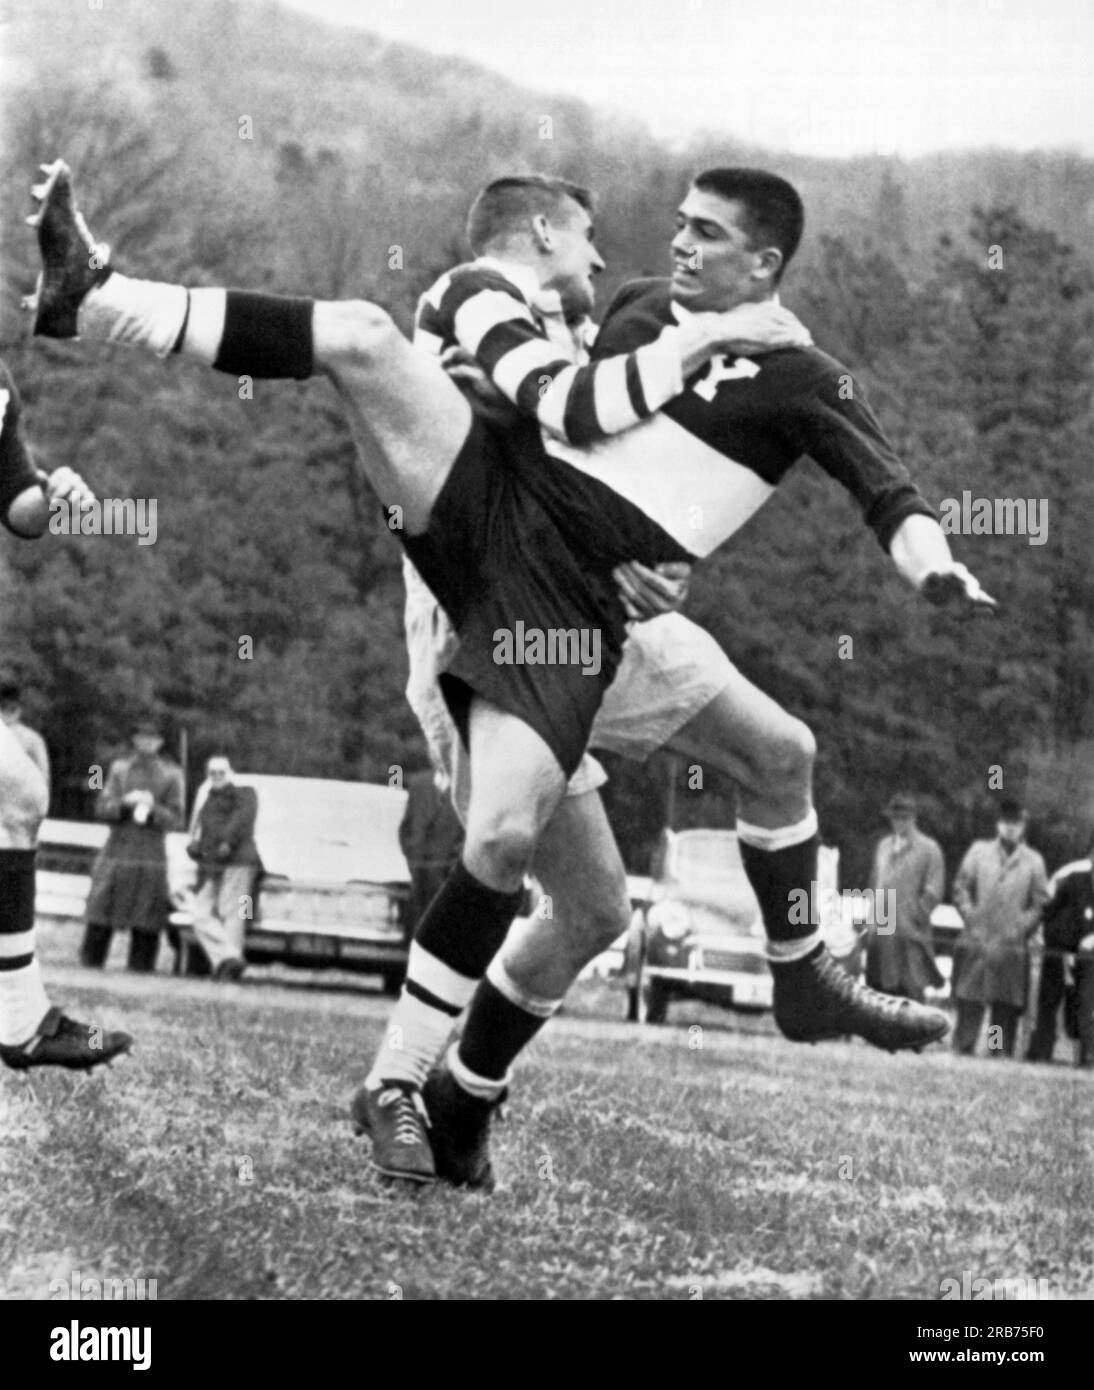 Farmington, Connecticutt:  1961 Two players from Dartmouth and Yale collide in their annual rugby match at the Farmington Polo Grounds. Stock Photo